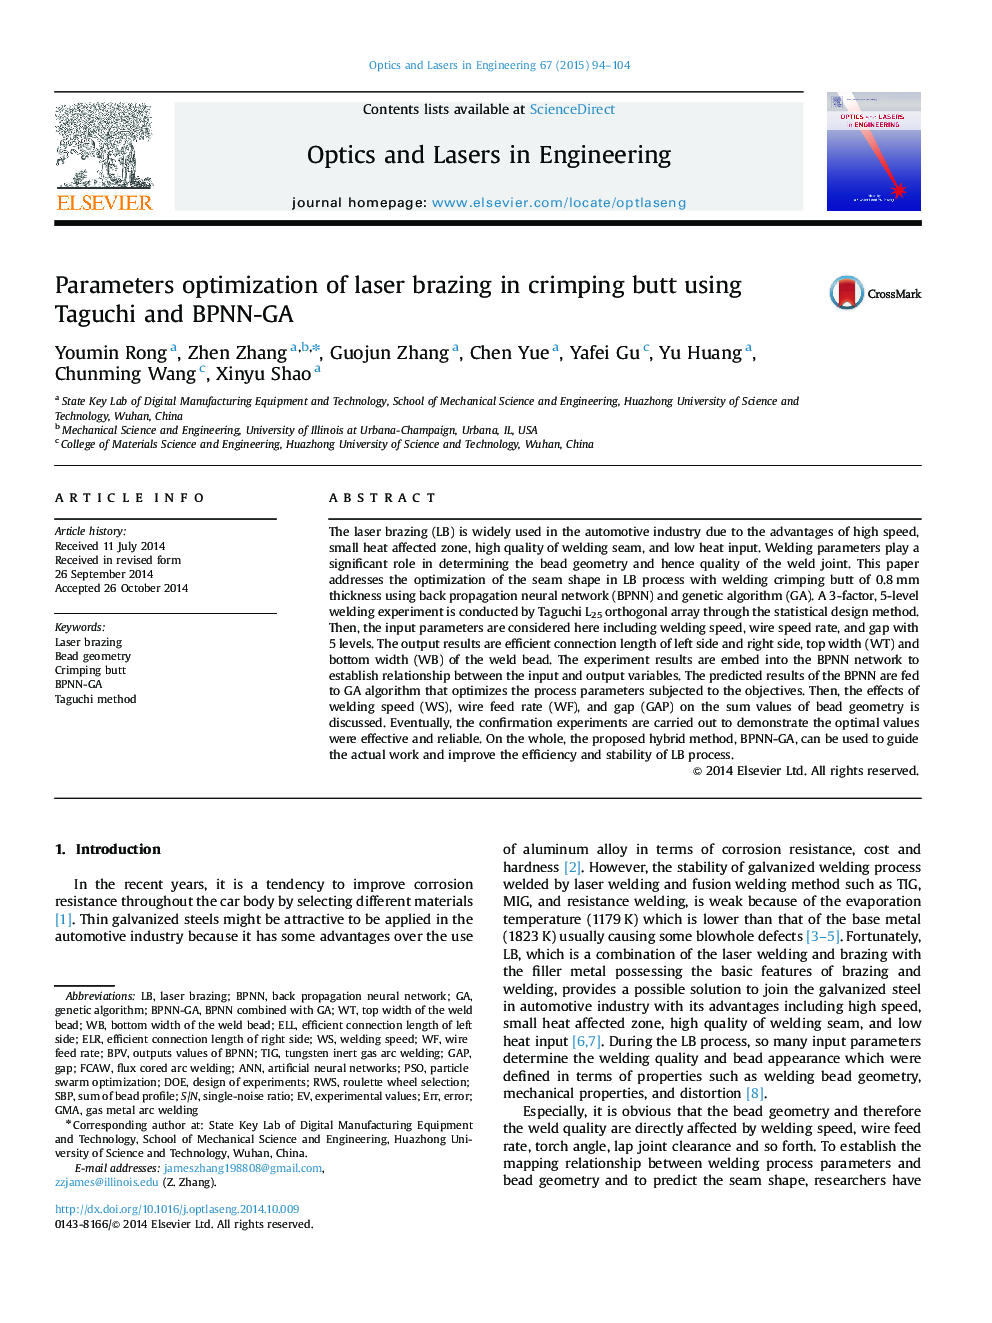 Parameters optimization of laser brazing in crimping butt using Taguchi and BPNN-GA